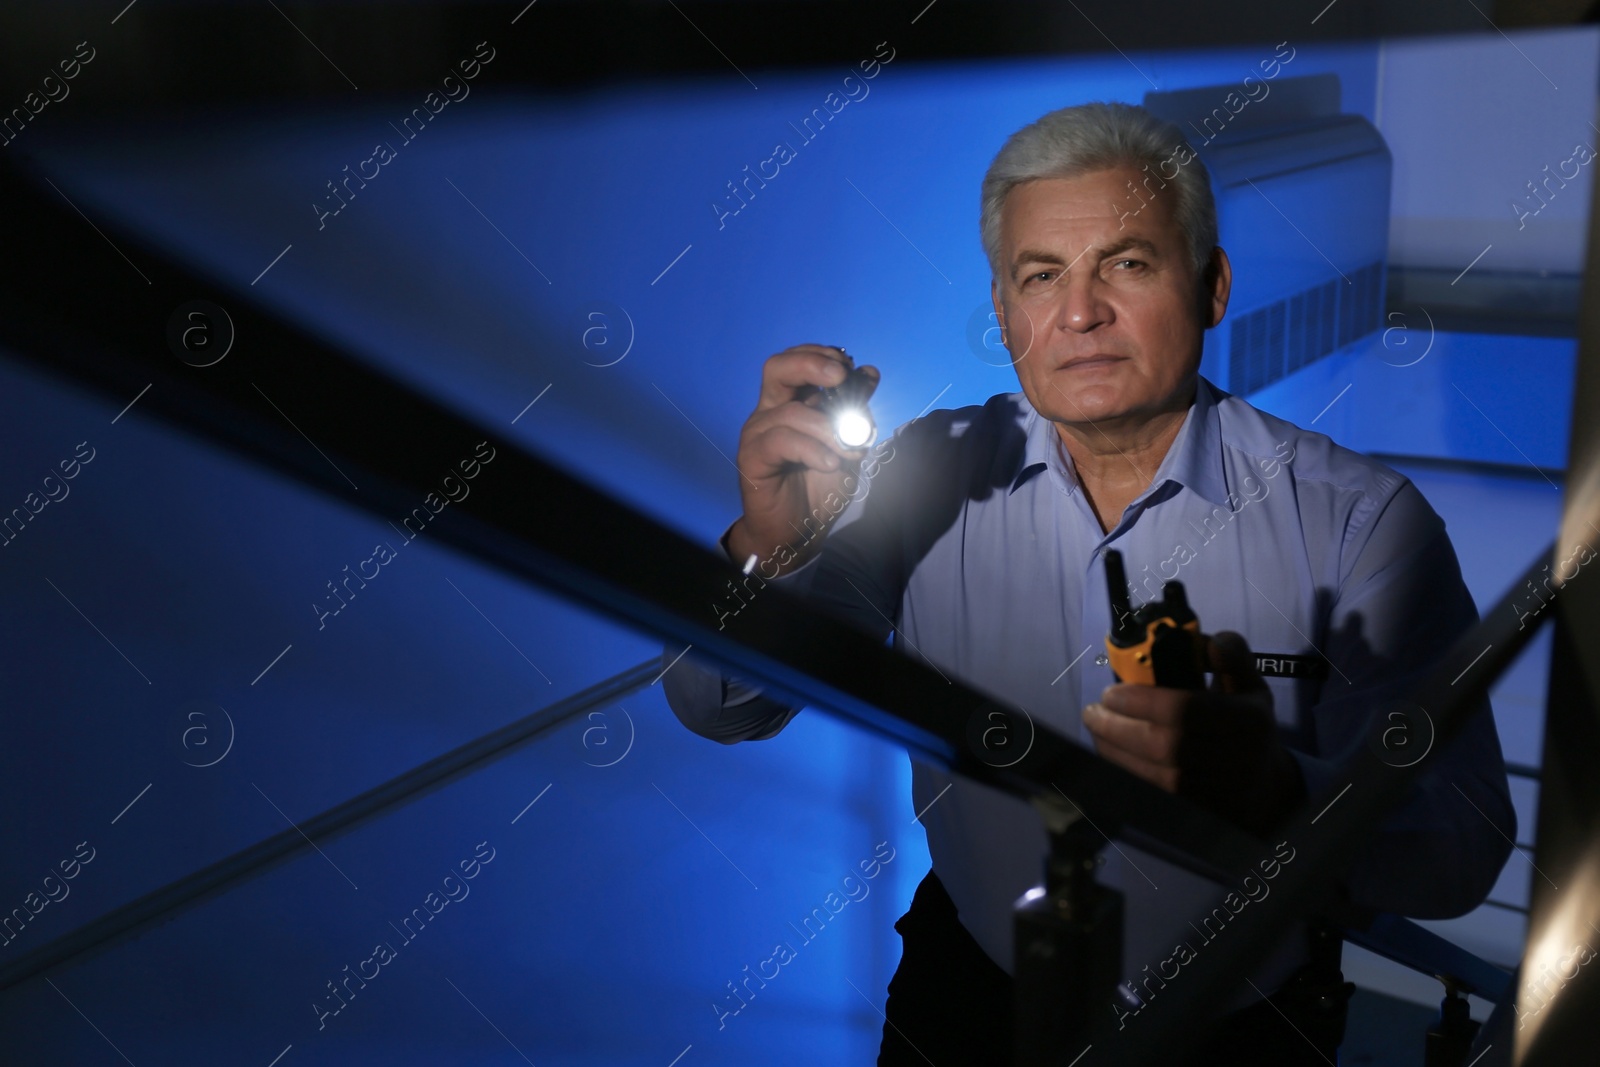 Photo of Professional security guard with flashlight on stairs in dark room